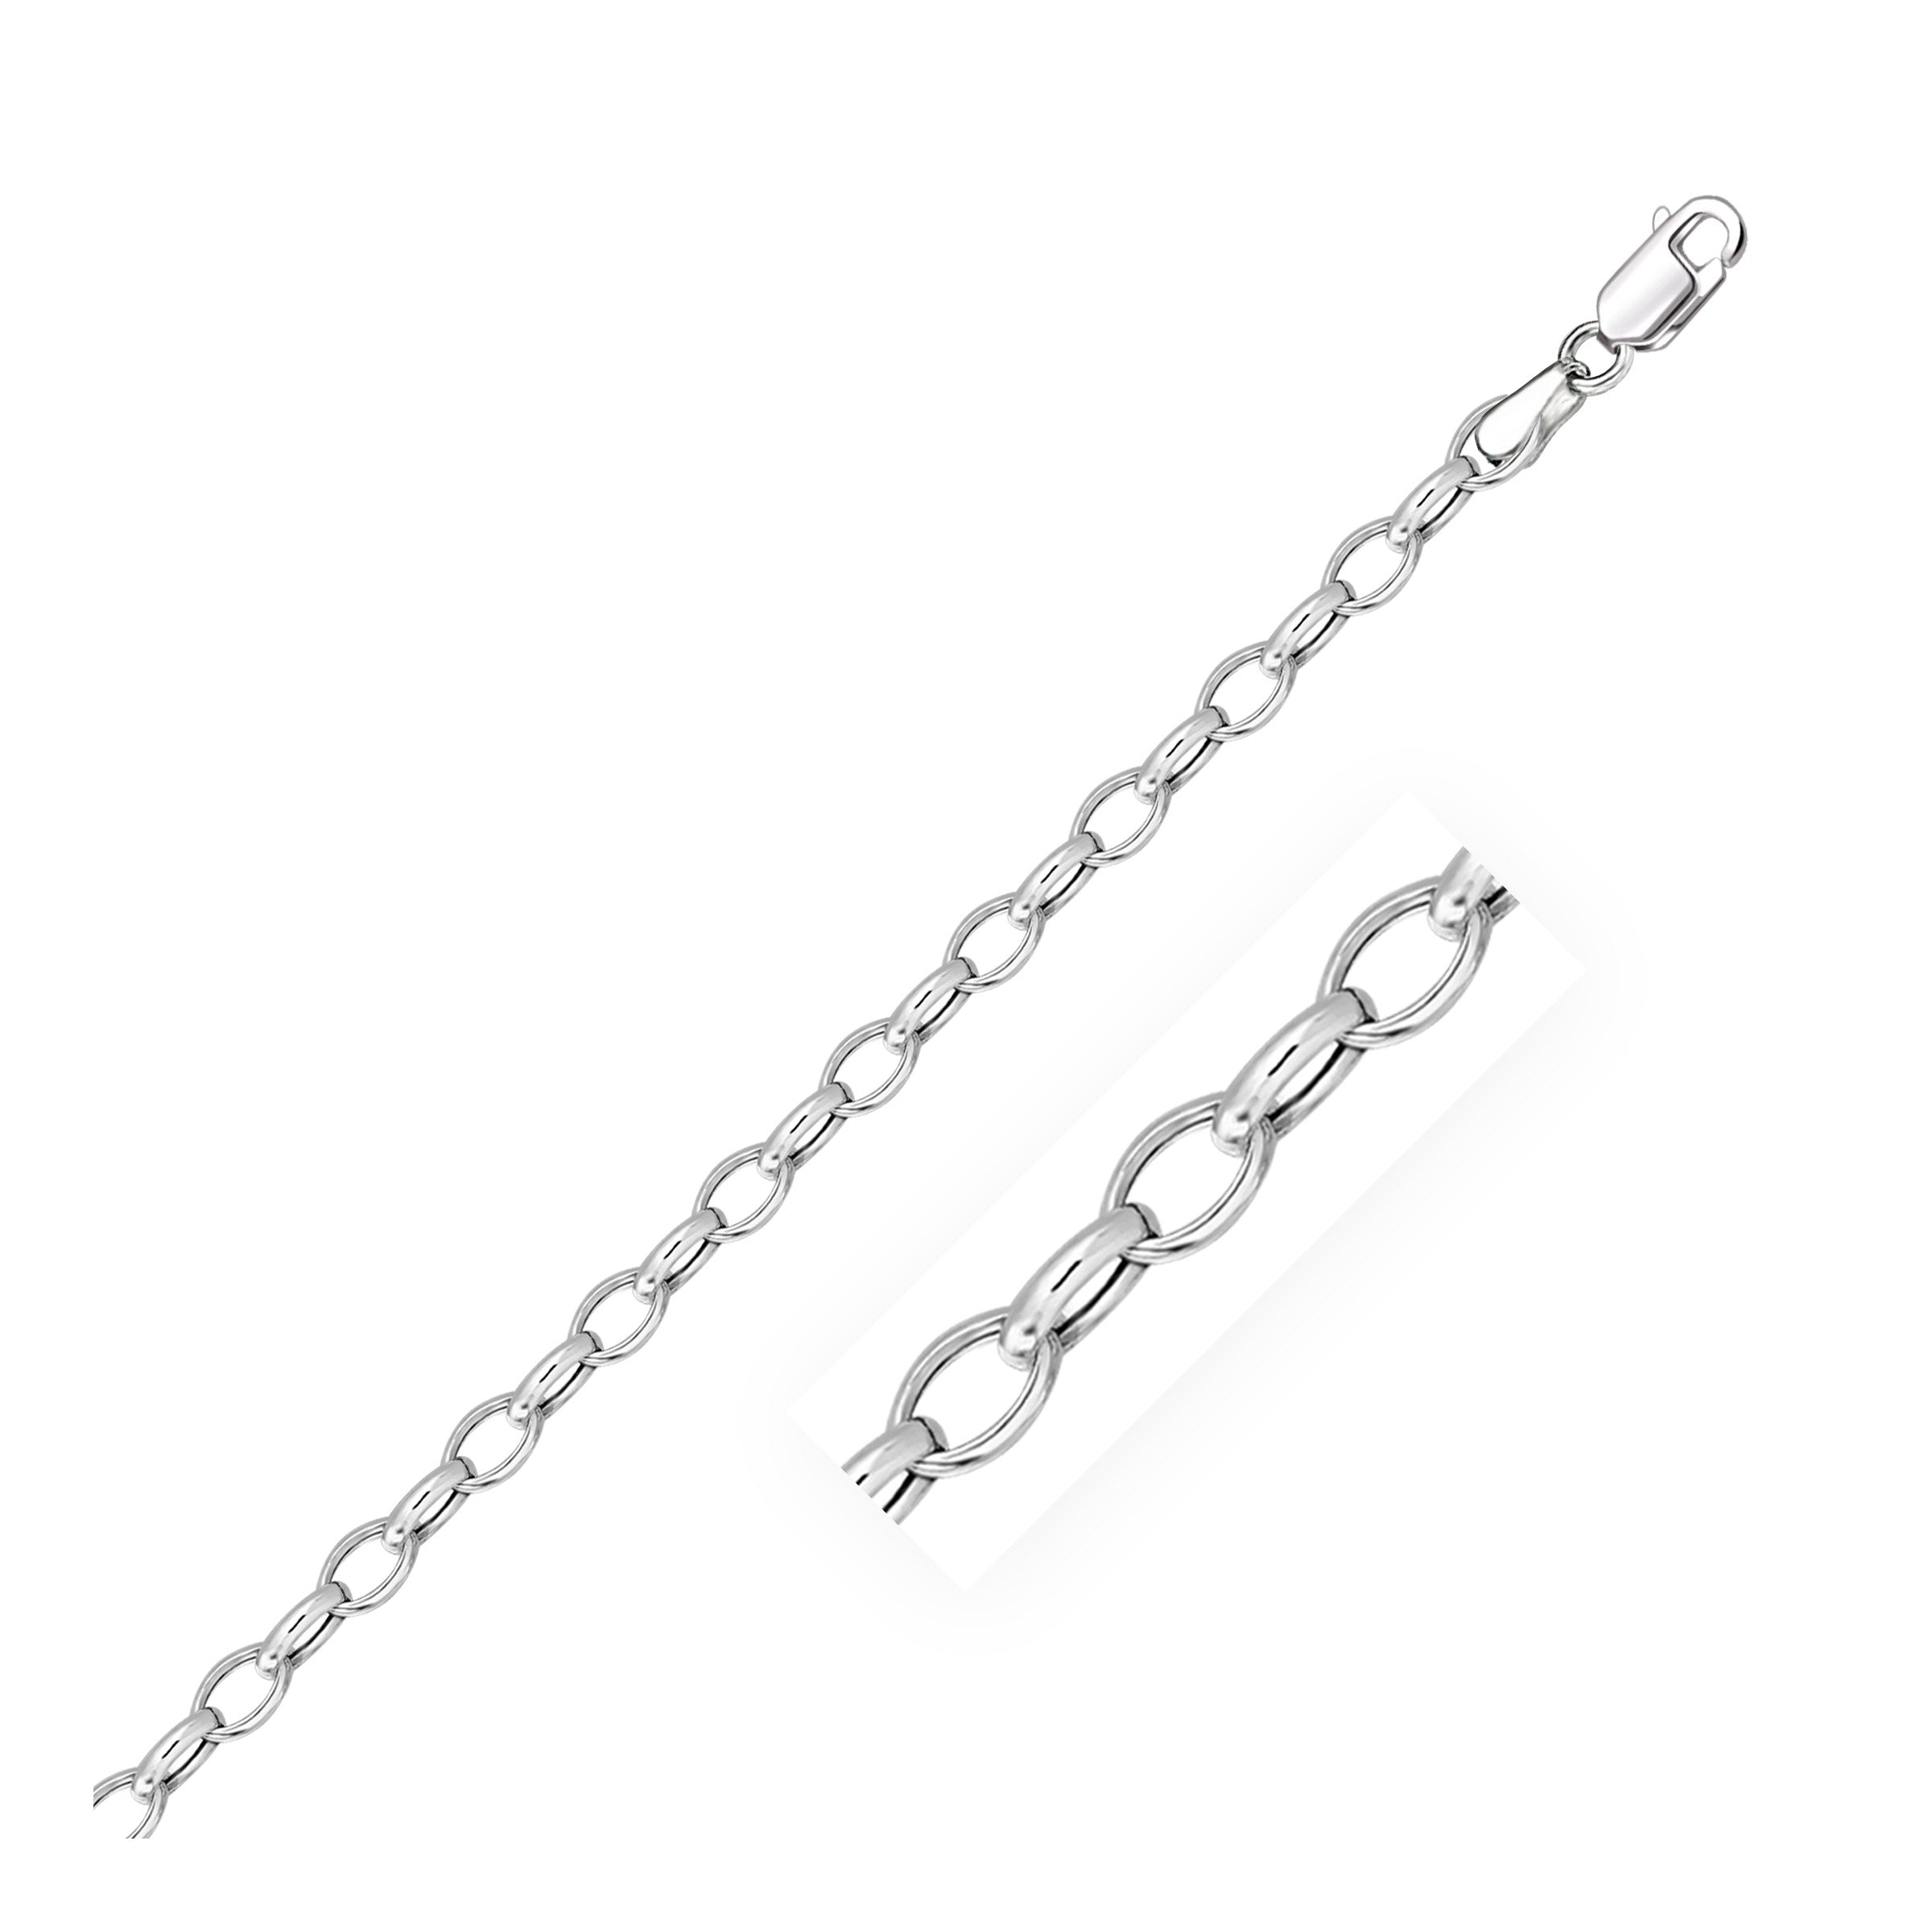 4 6Mm 14K White Gold Oval Rolo Chain 24639-1